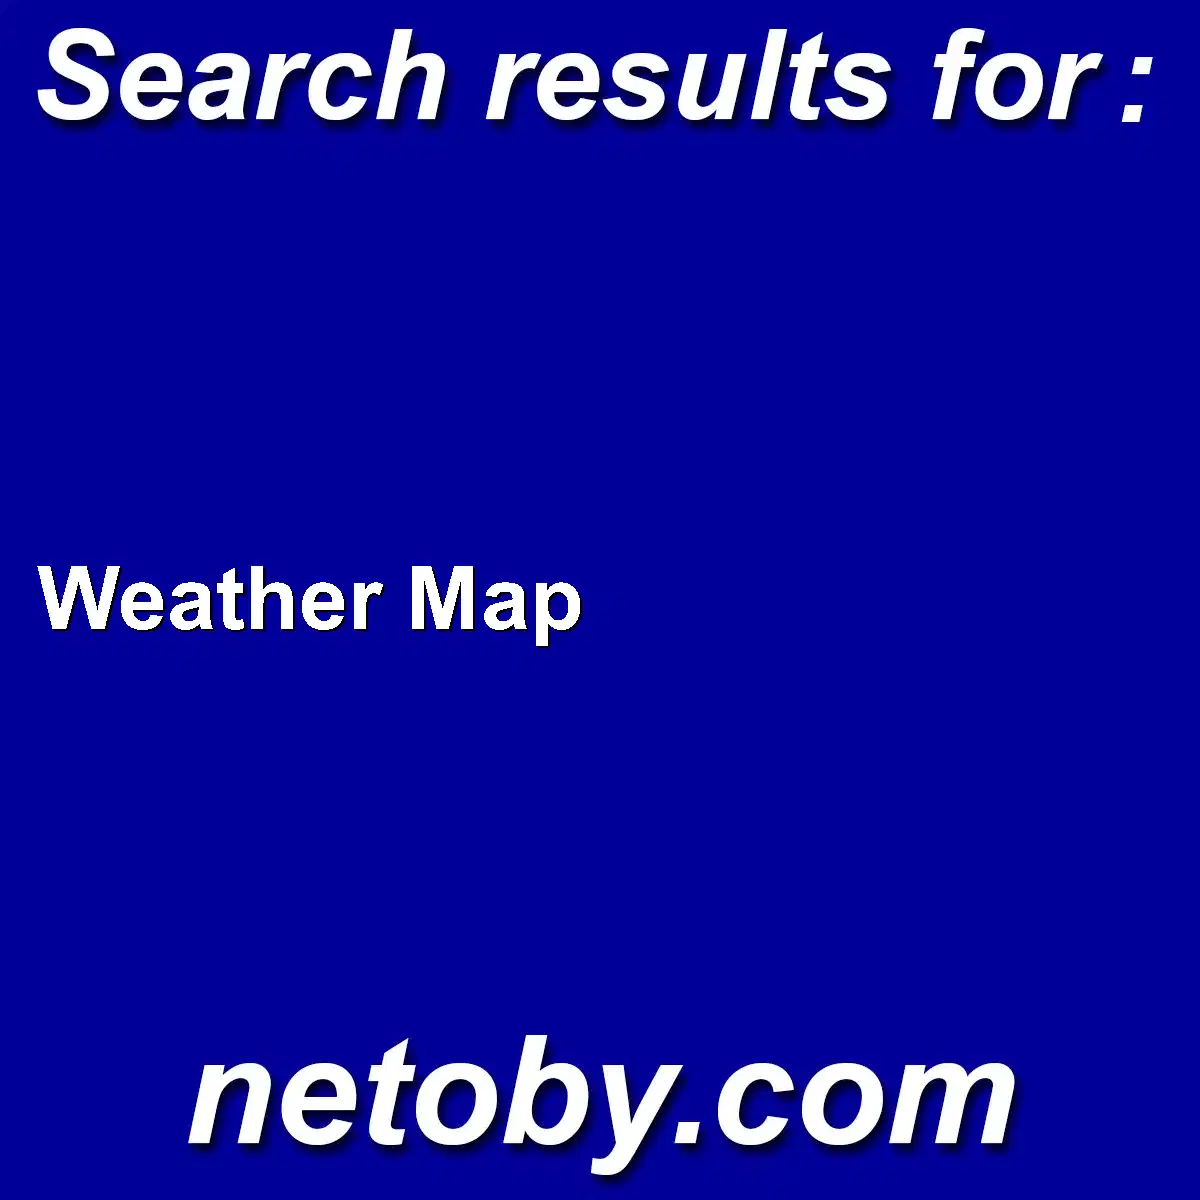 ﻿Weather Map